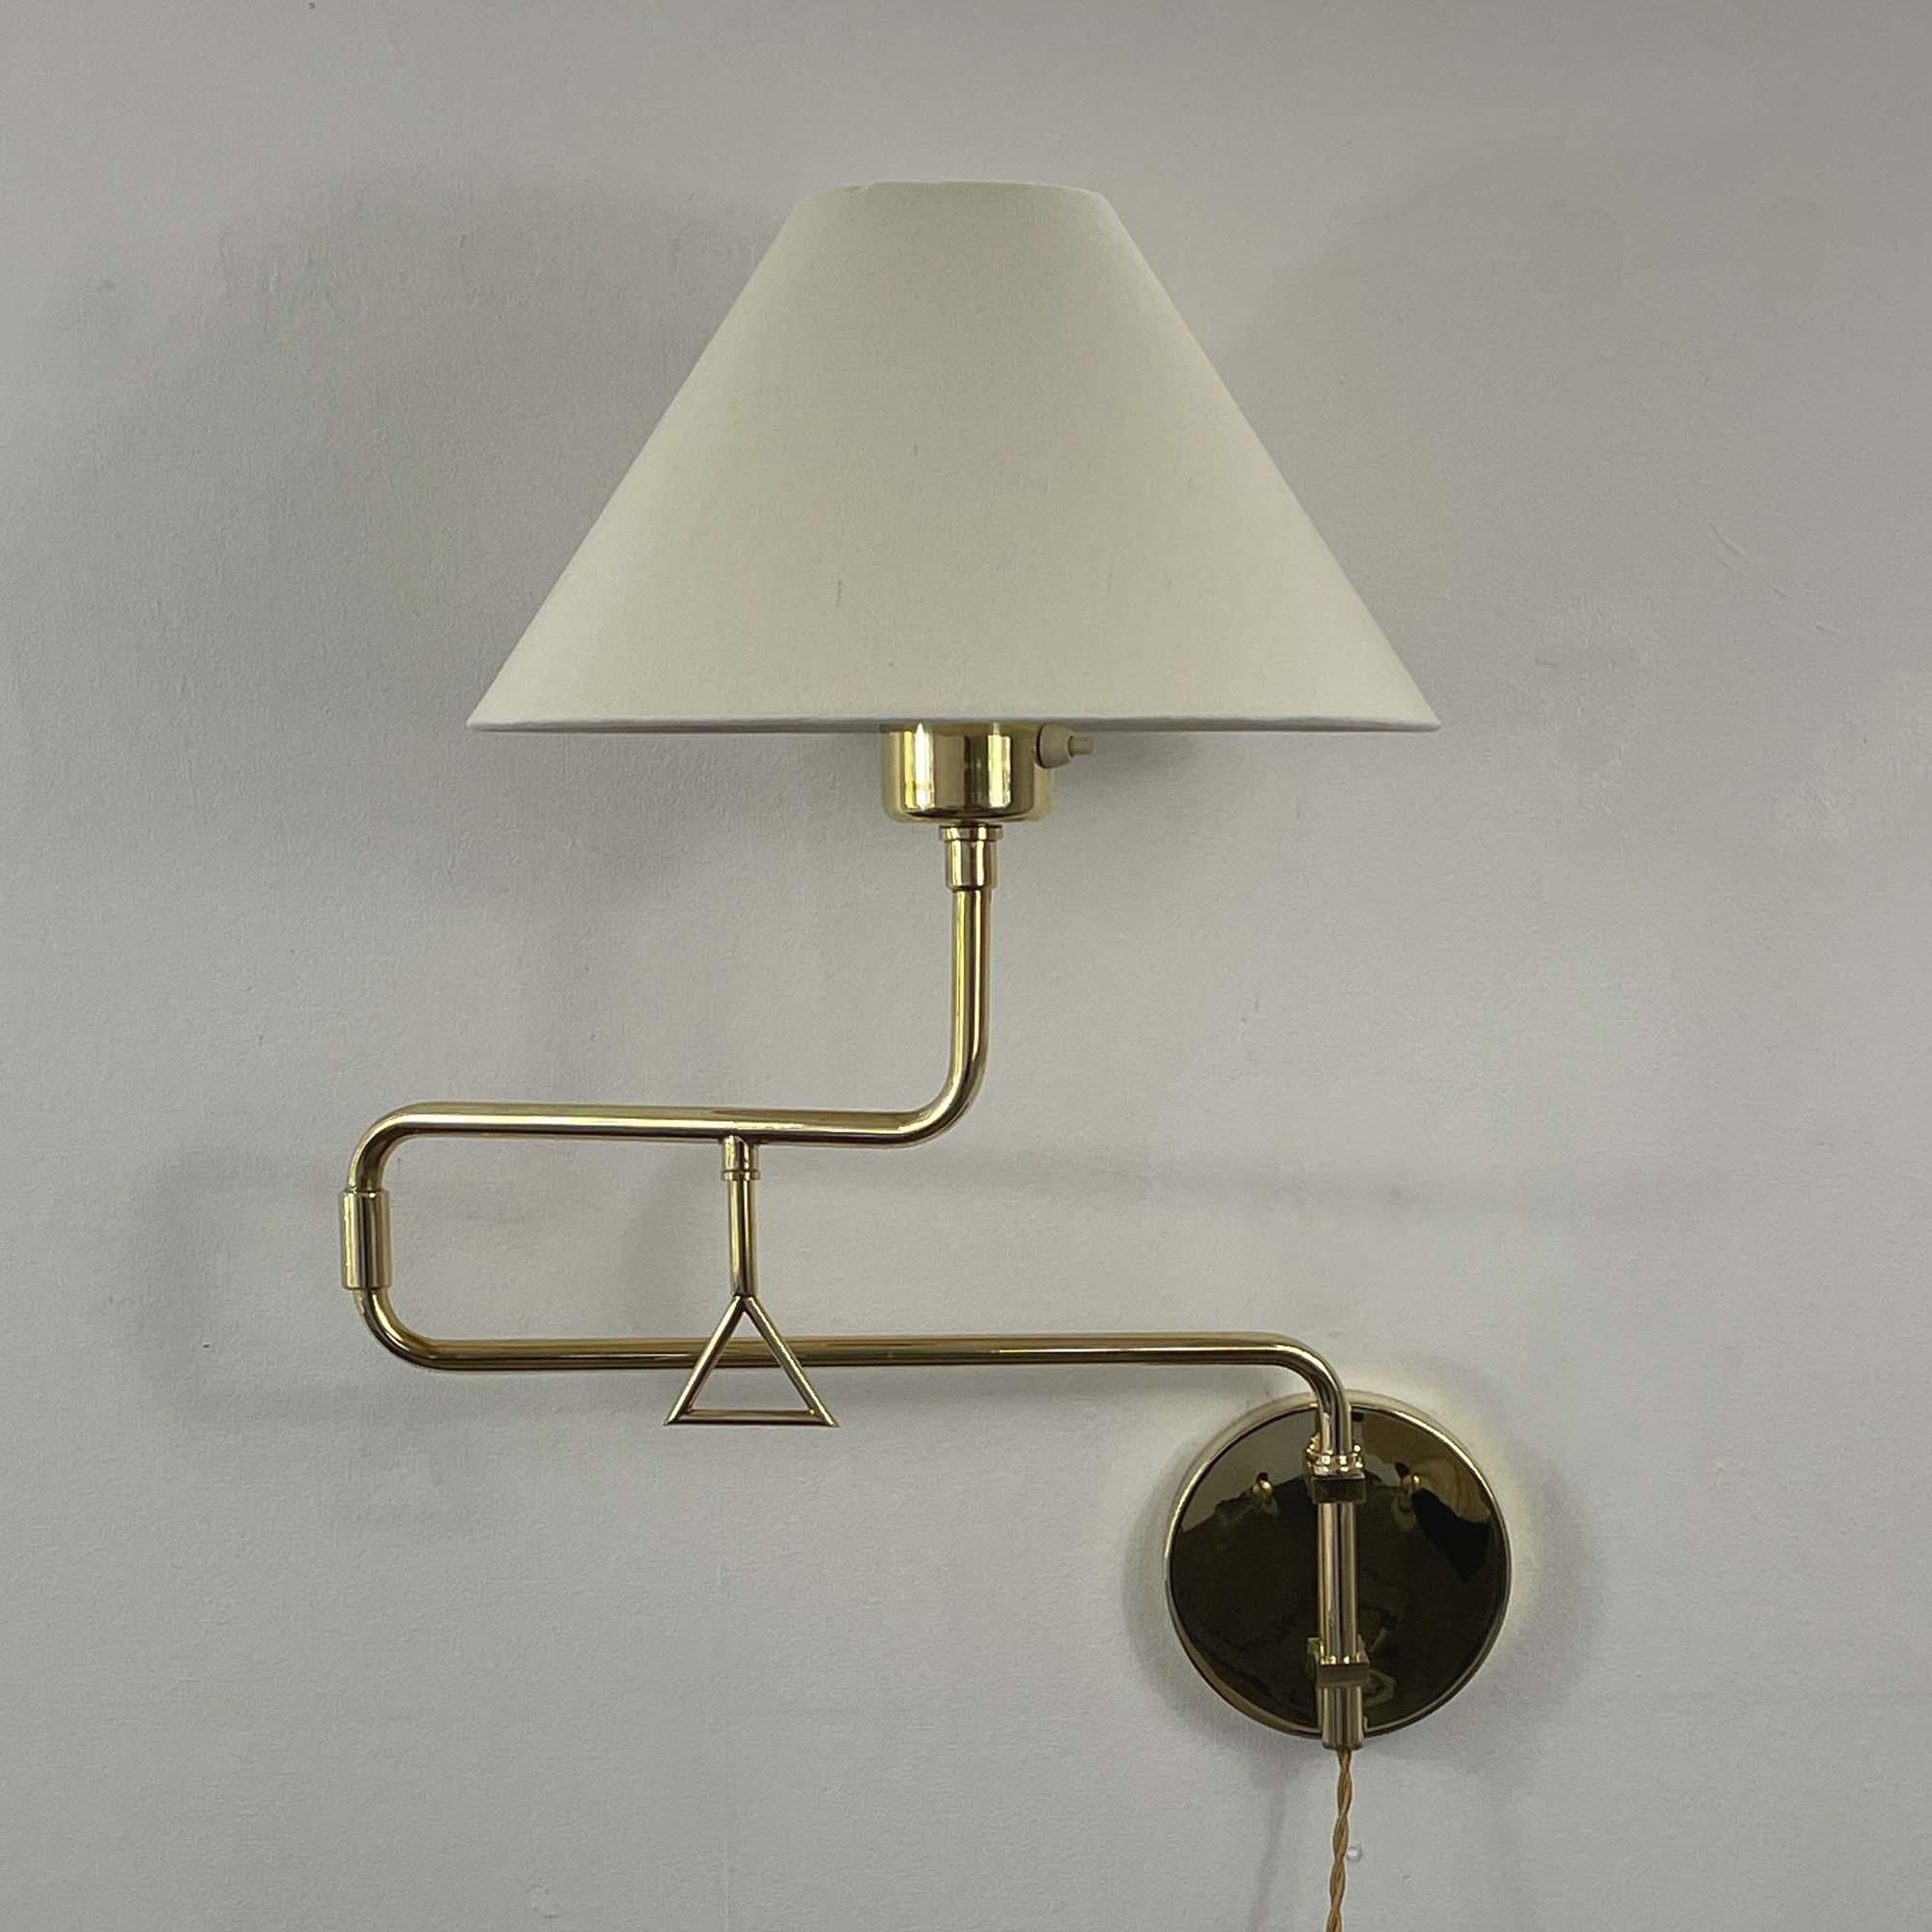 This elegant wall light was designed and manufactured in Sweden by Armatur Hantverk Tibro in the 1950s to 1960s. It features an articulating brass lamp arm and off-white linen lampshade. The light has been rewired with new fabric cord. The shade is